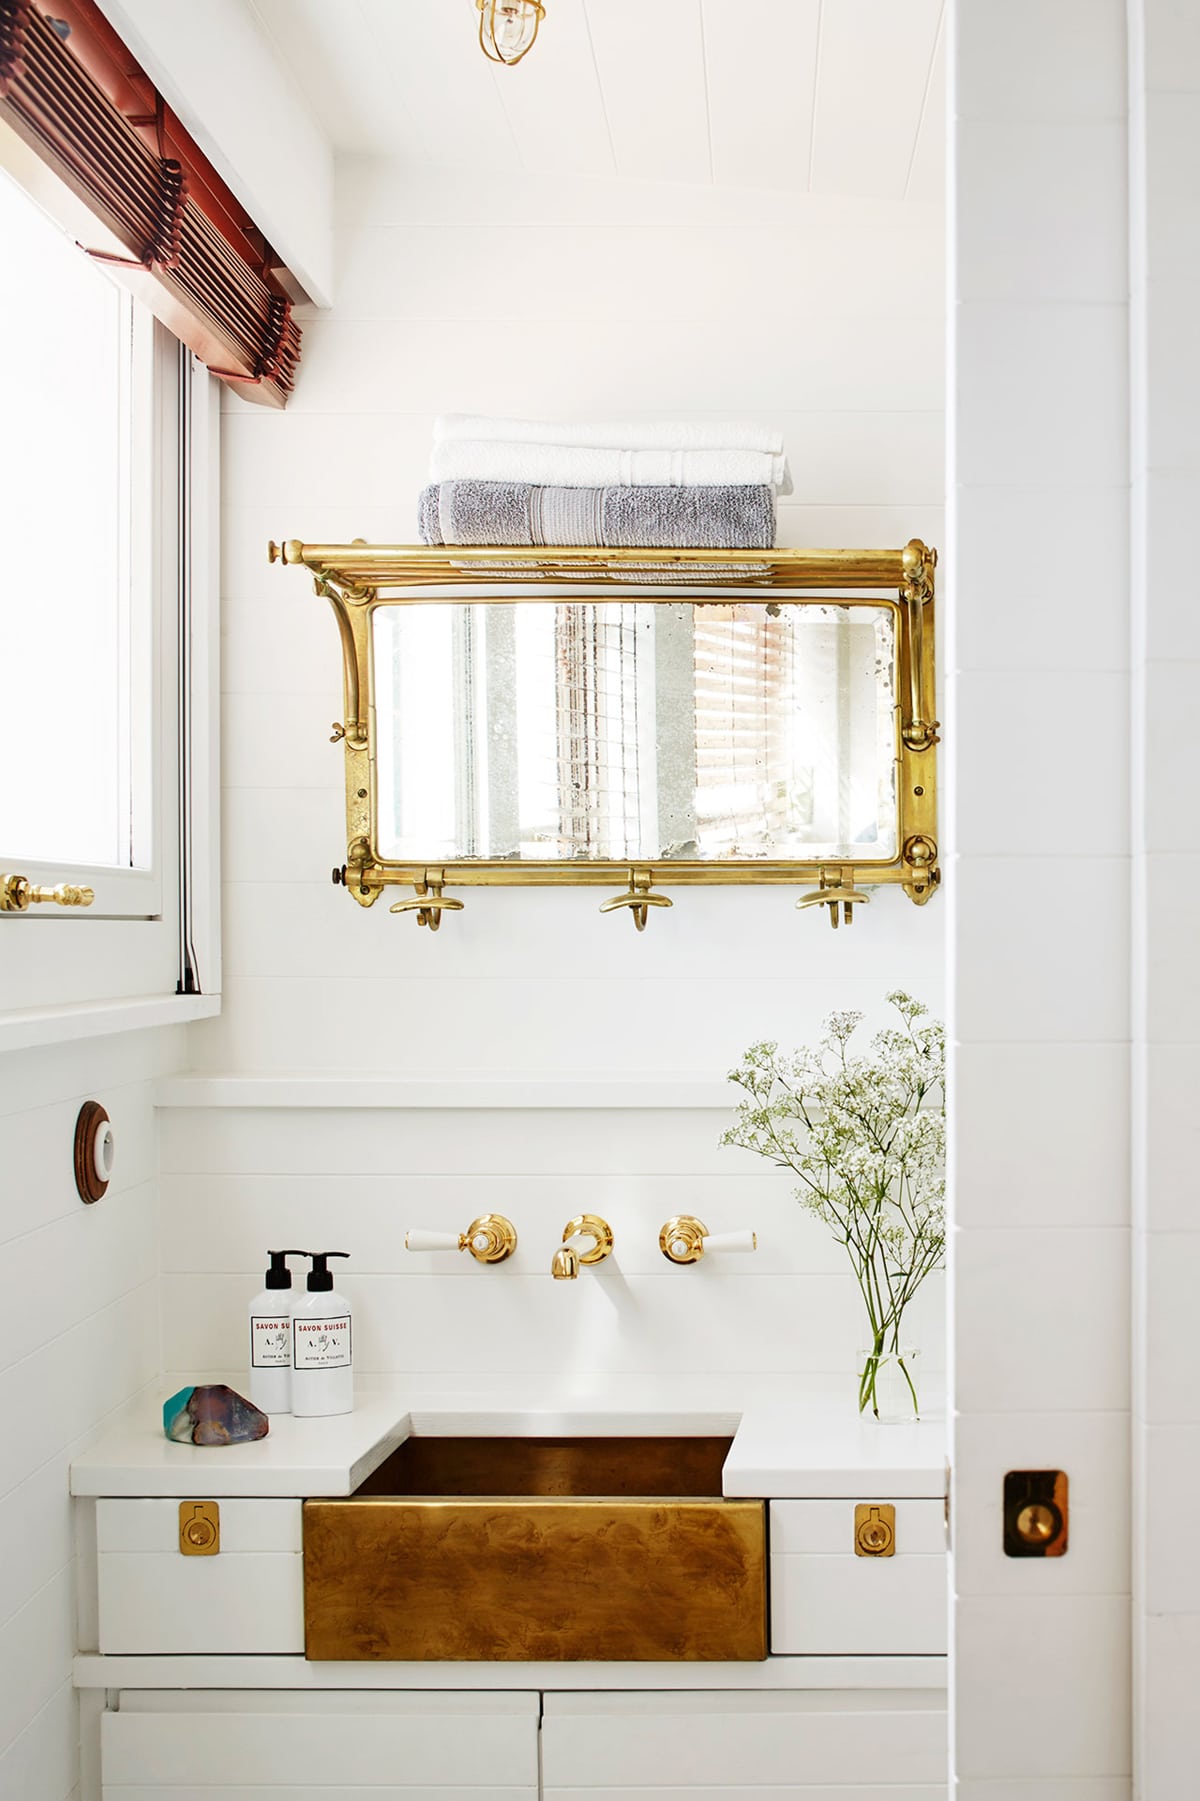 brass and white reign in the bathroom of this chic and tiny home on the italian riviera | house tour on coco kelley